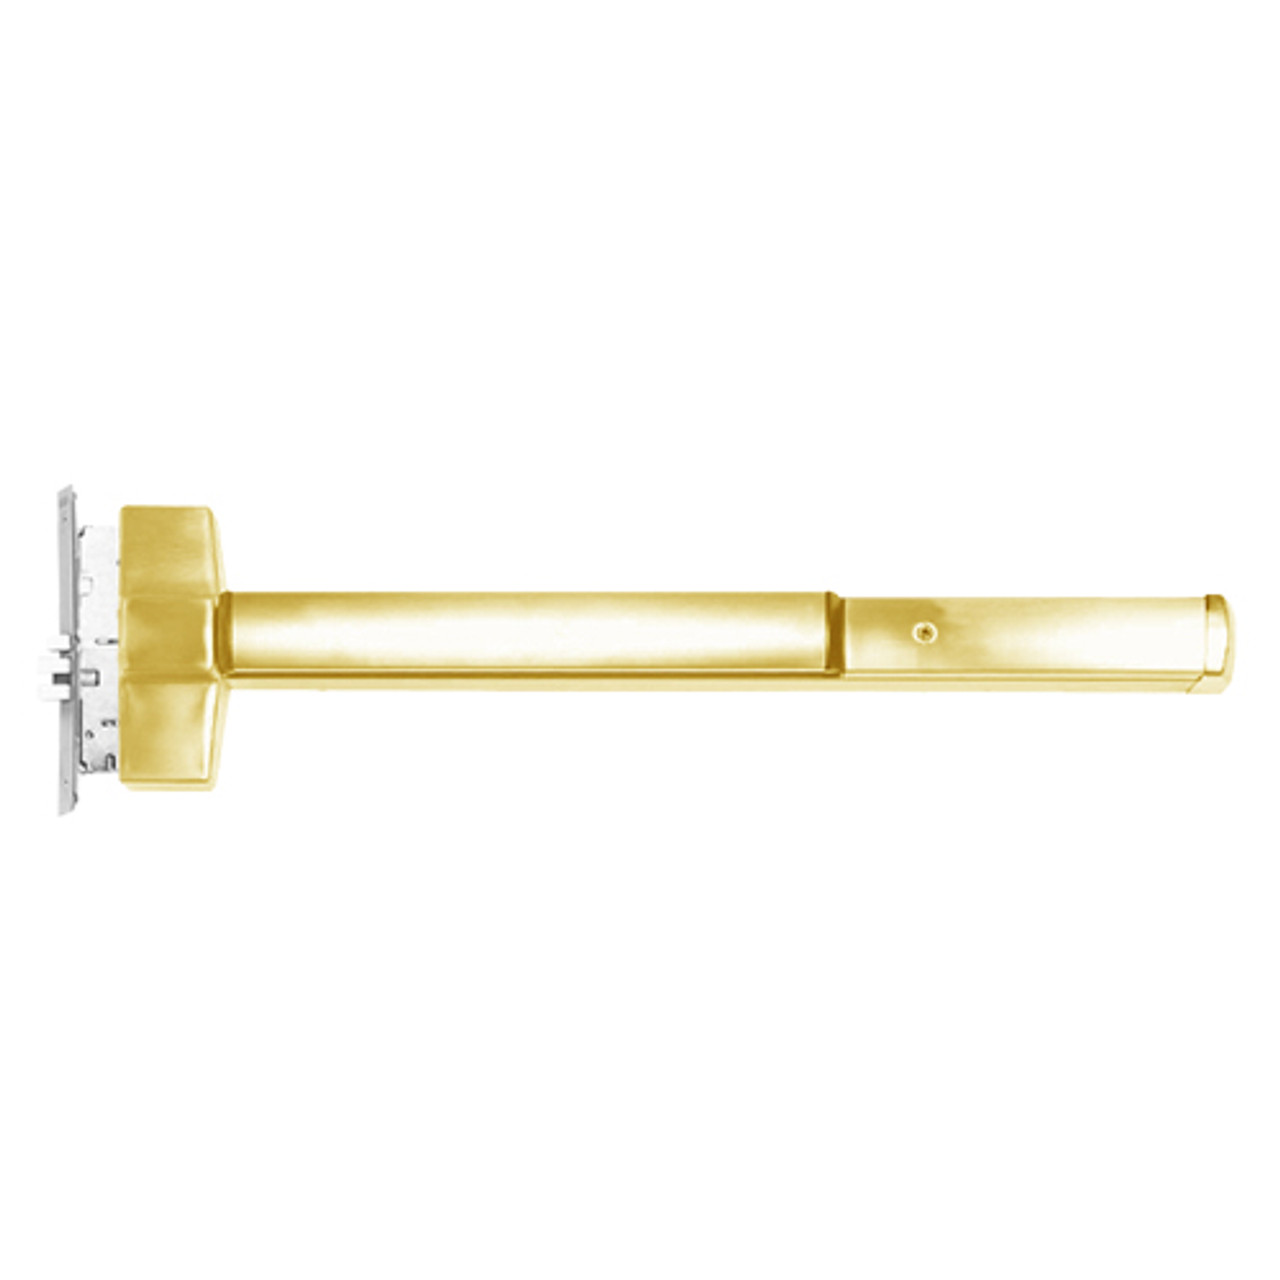 ED5657L-605-MELR-M92-LHR Corbin ED5600 Series Non Fire Rated Mortise Exit Device with Motorized Latch Retraction and Touchbar Monitoring in Bright Brass Finish